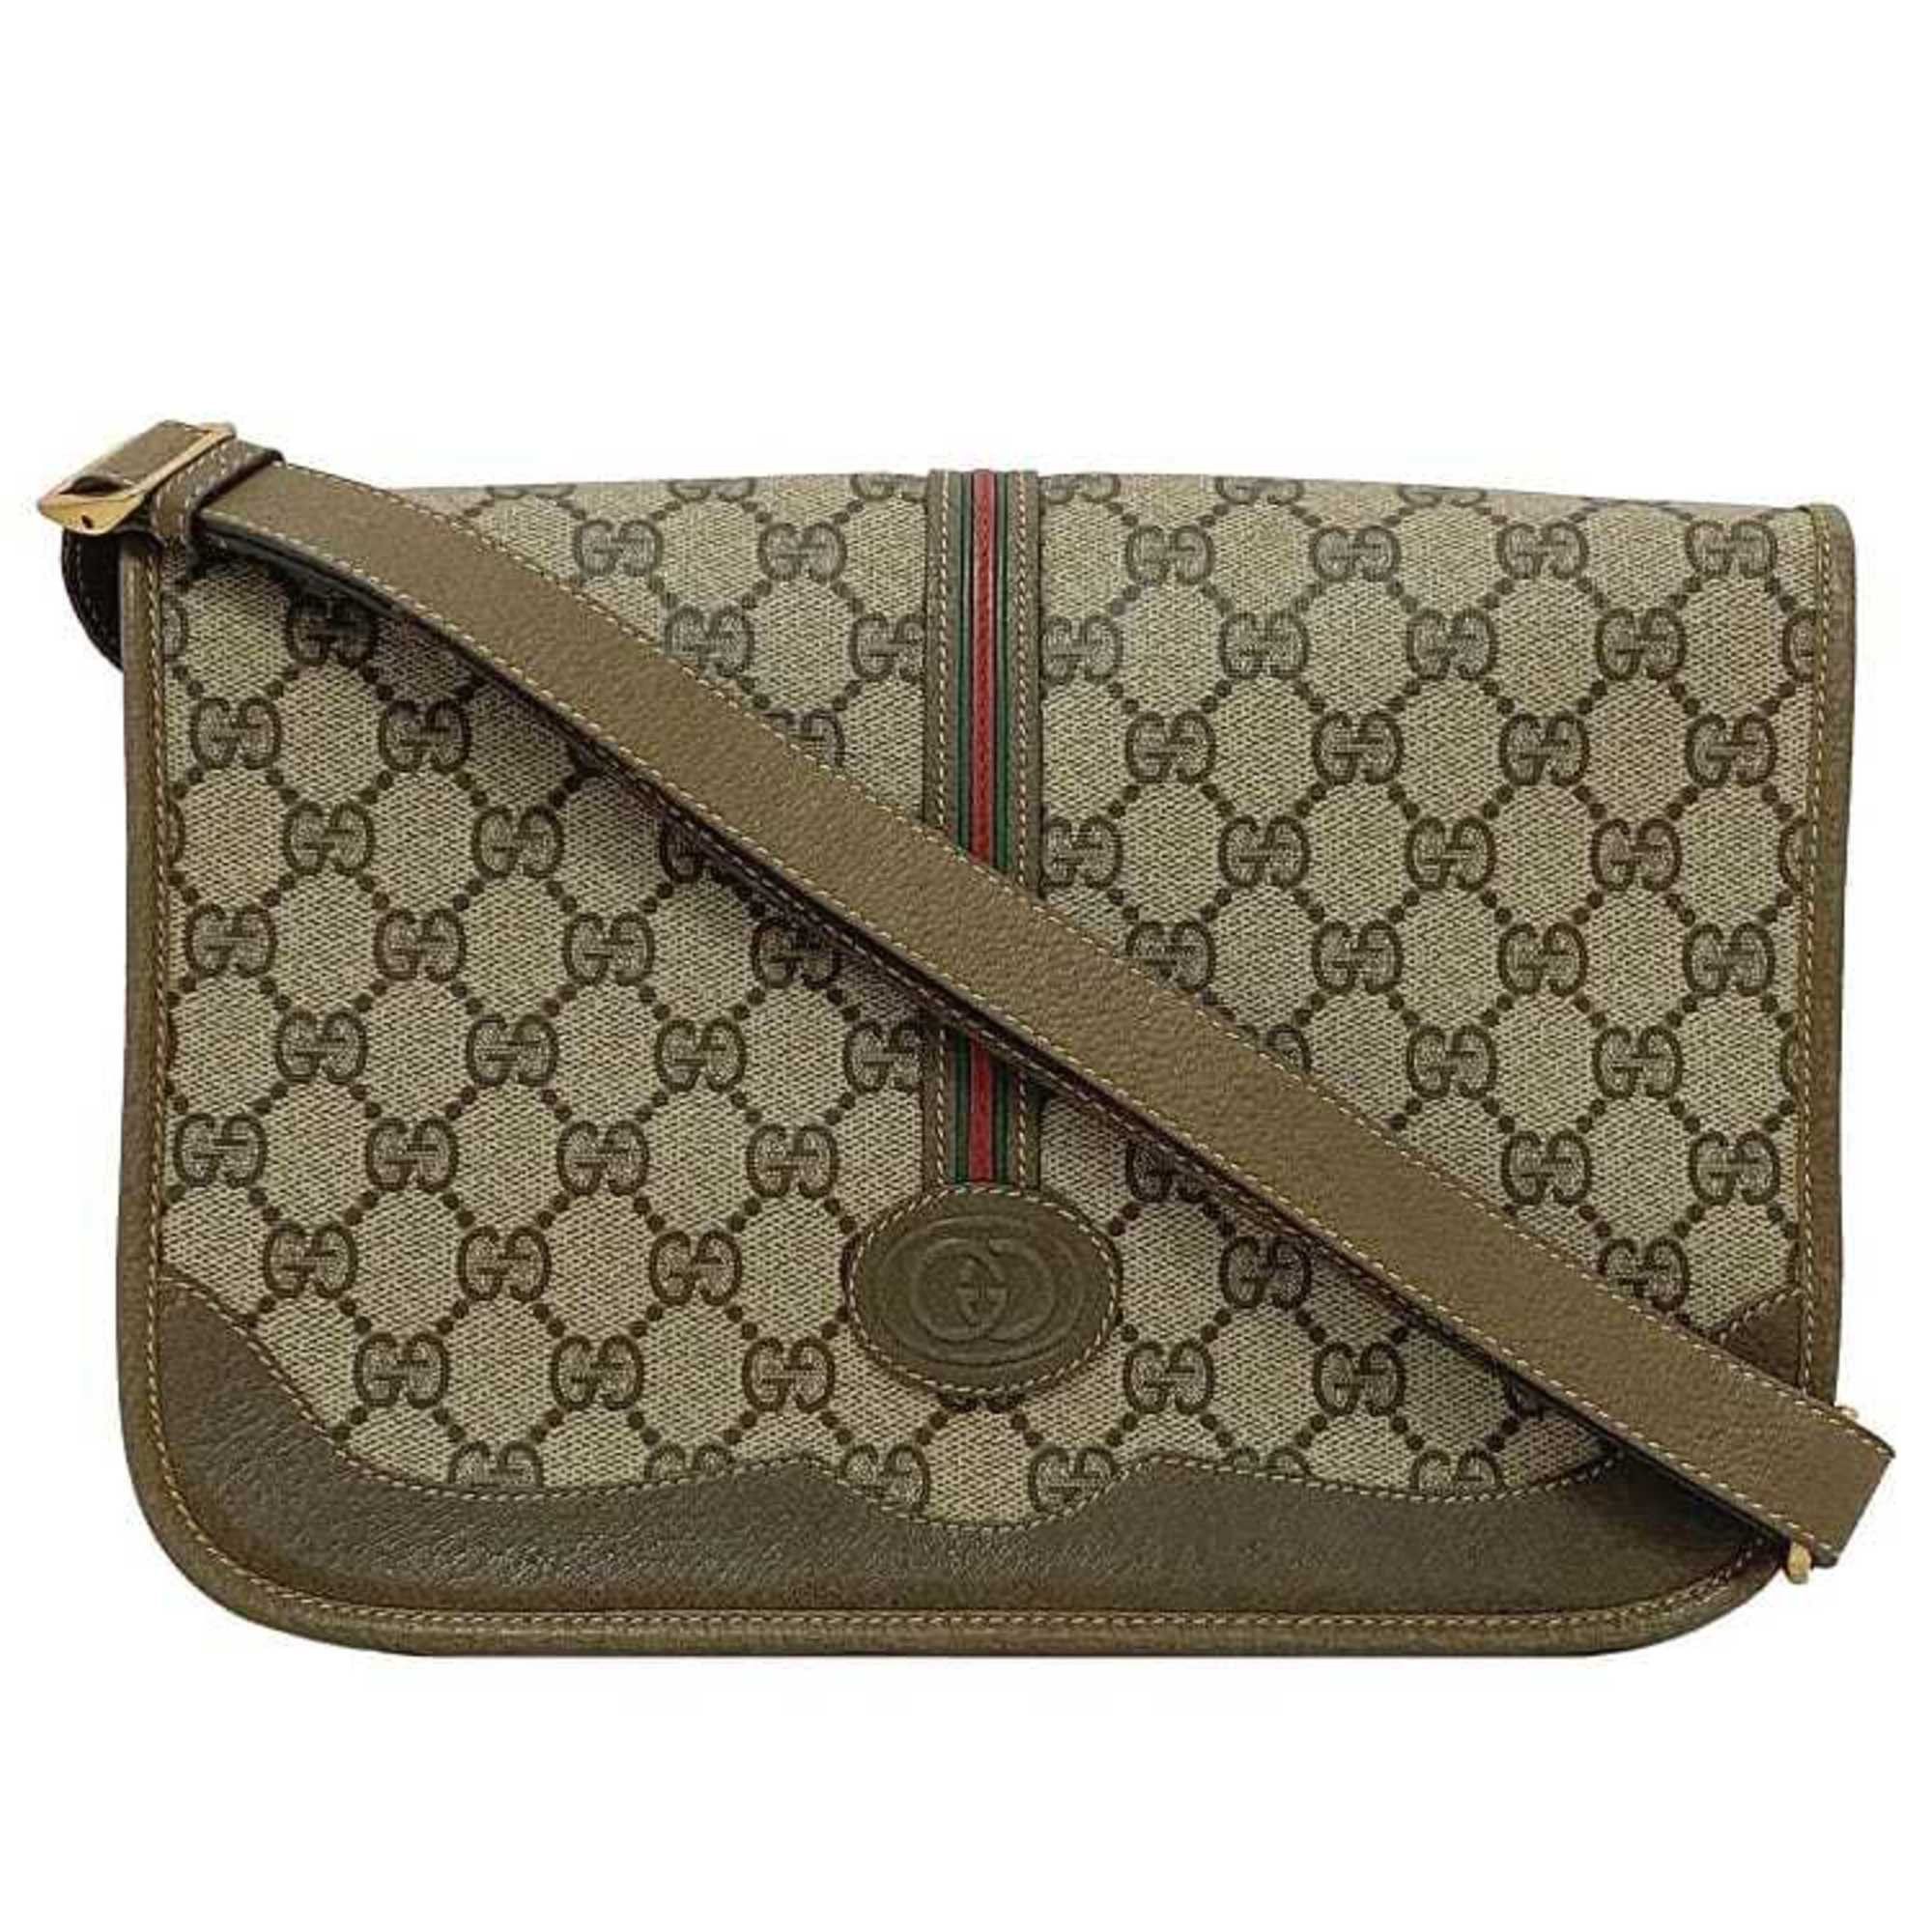 Used Auth Gucci Sherry Line 139260 Women's GG Canvas Tote Bag Beige 